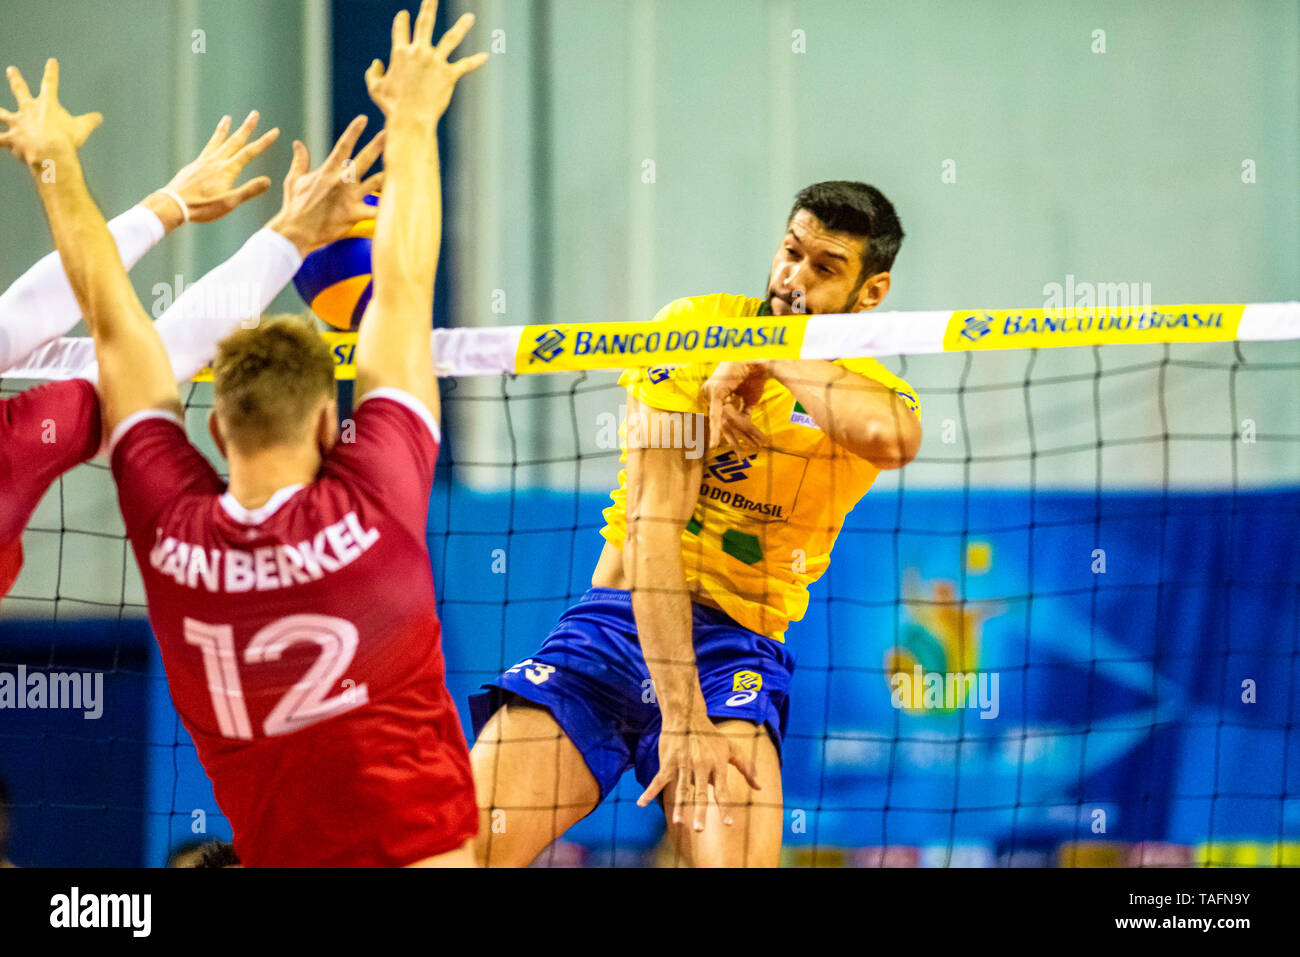 CAMPINAS, SP - 24.05.2019: AMISTOSO INTERNACIONAL BRASIL X CANADÁ - Flávio  (Brazil) in an international men's volleyball match between Brazil and  Canada, held at the Taquaral Gymnasium in Campinas, Sãulo, this Friday (